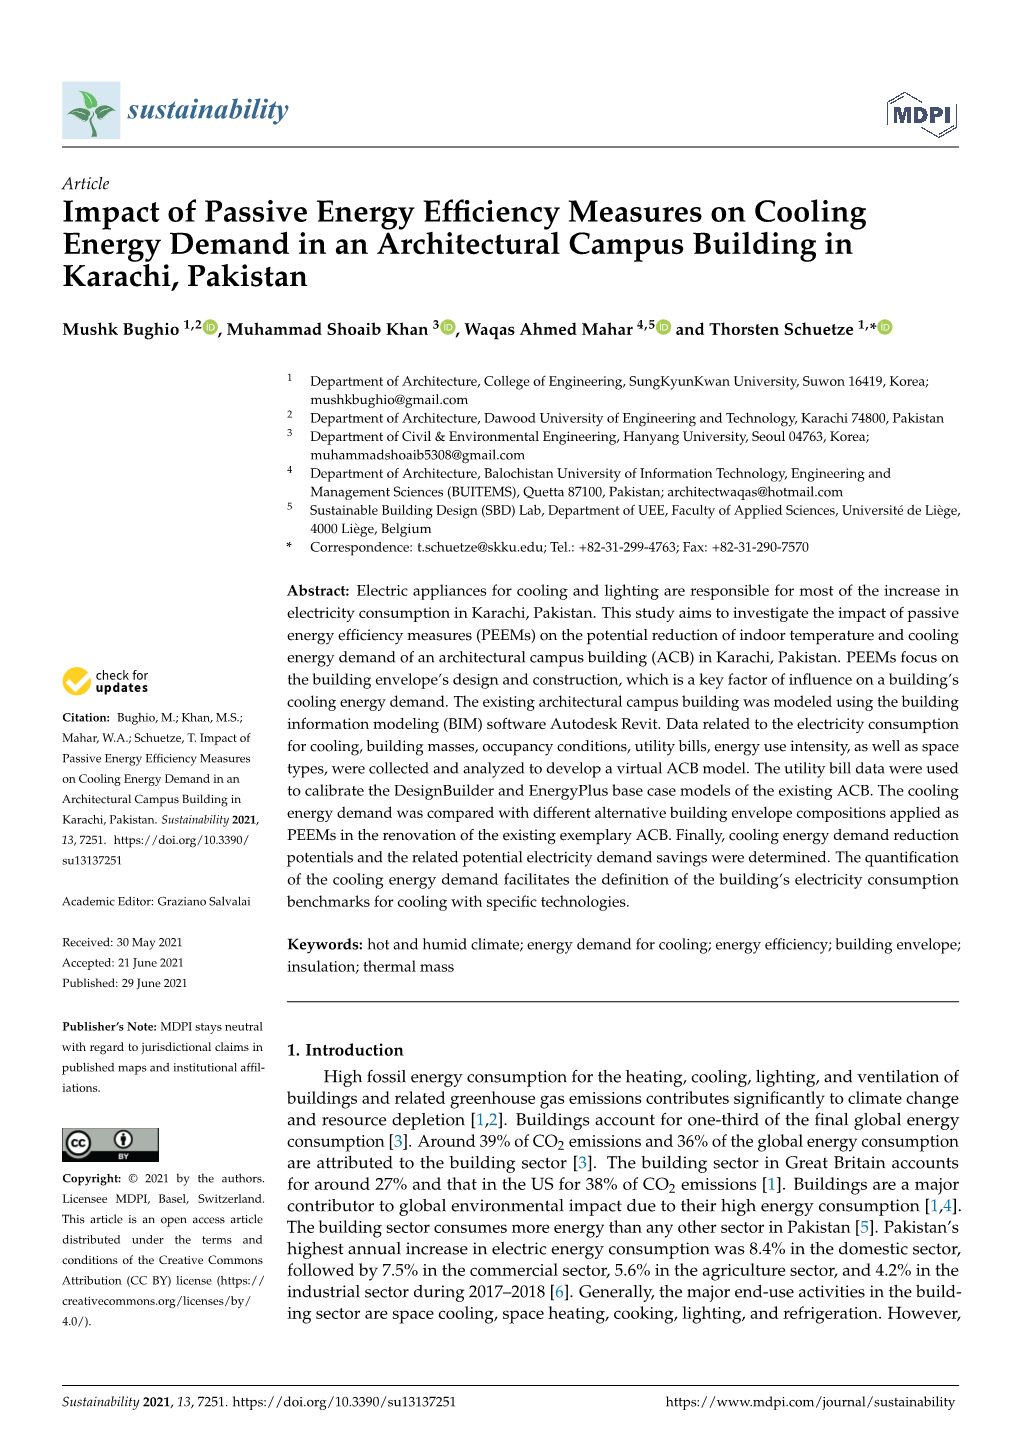 Impact of Passive Energy Efficiency Measures on Cooling Energy Demand in an Architectural Campus Building in Karachi, Pakistan